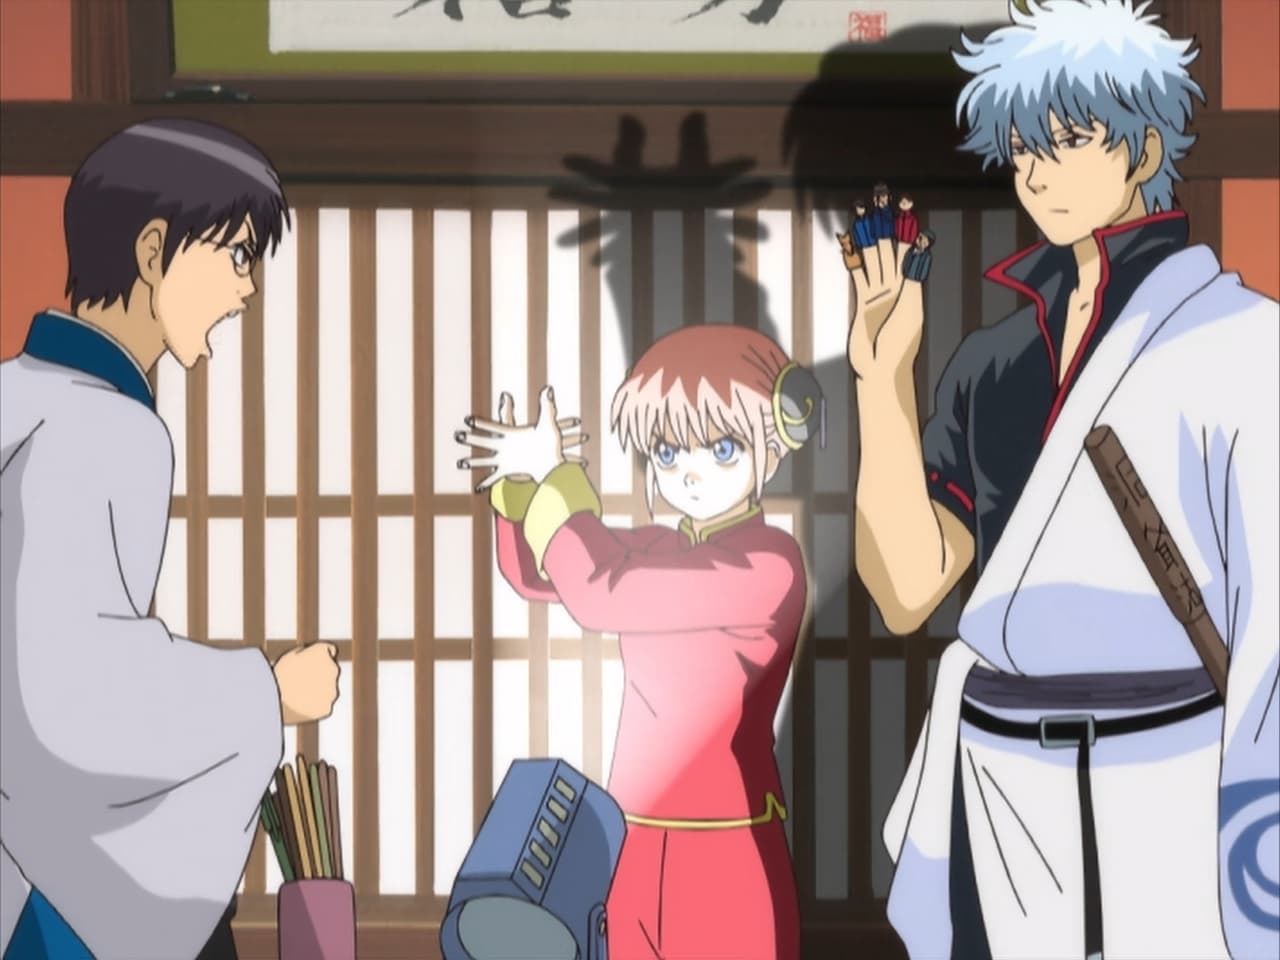 Gintama - Season 1 Episode 9 : Fighting Should Be Done With Fists!